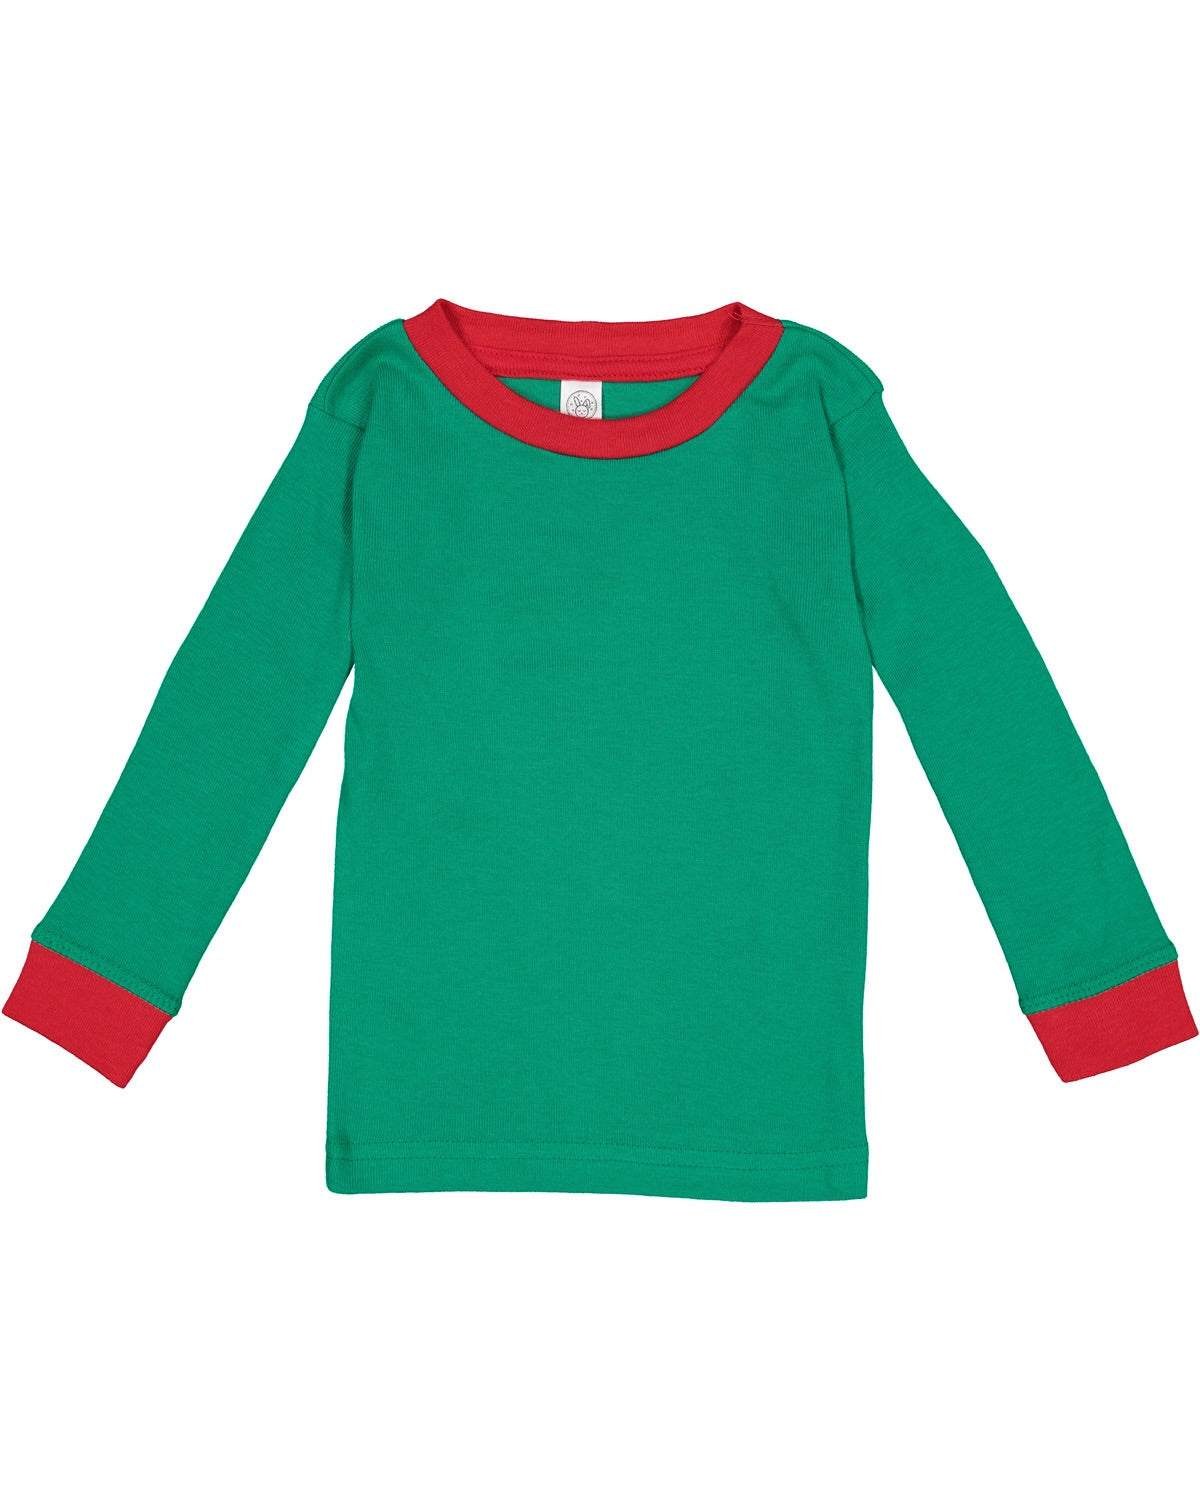 Green and Red Two Piece Pajamas  - Doodlebug's Children's Boutique